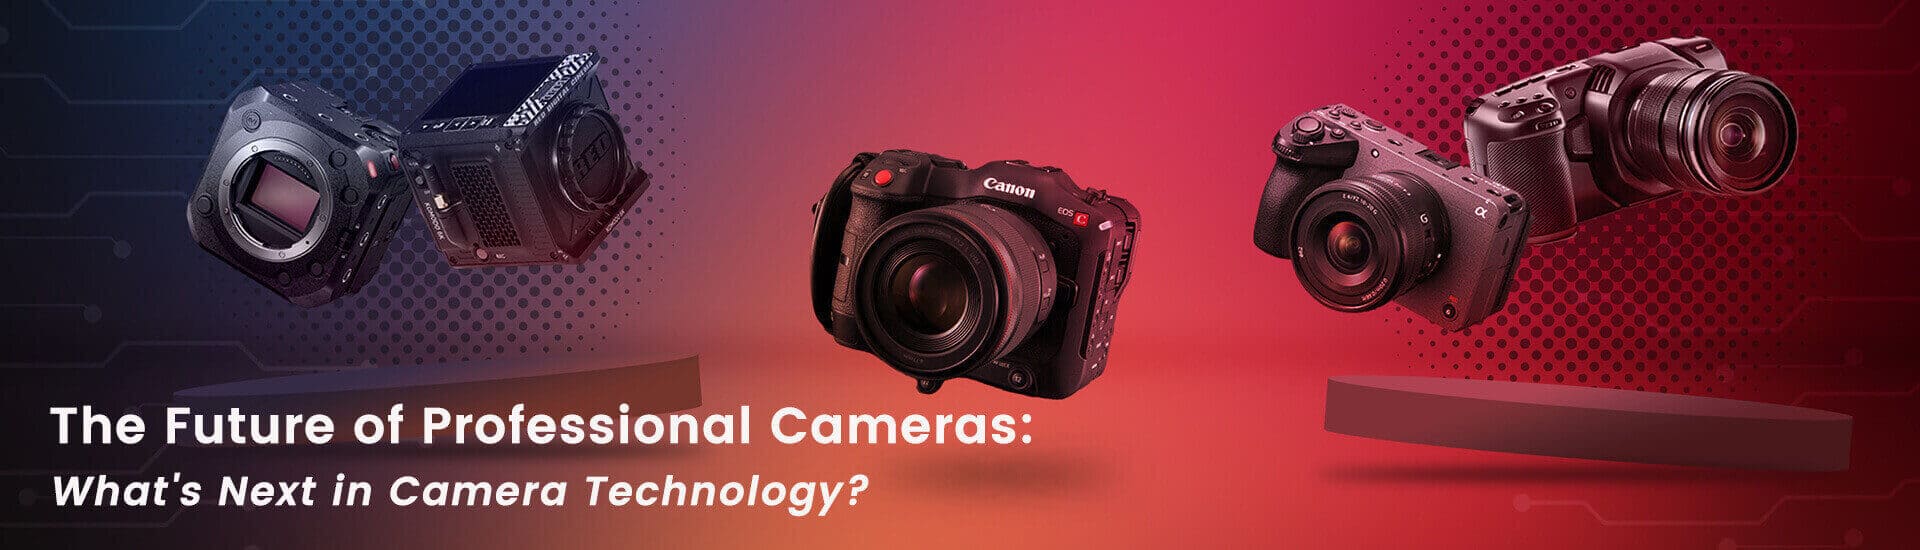 The Future of Professional Cameras: What's Next in Camera Technology?